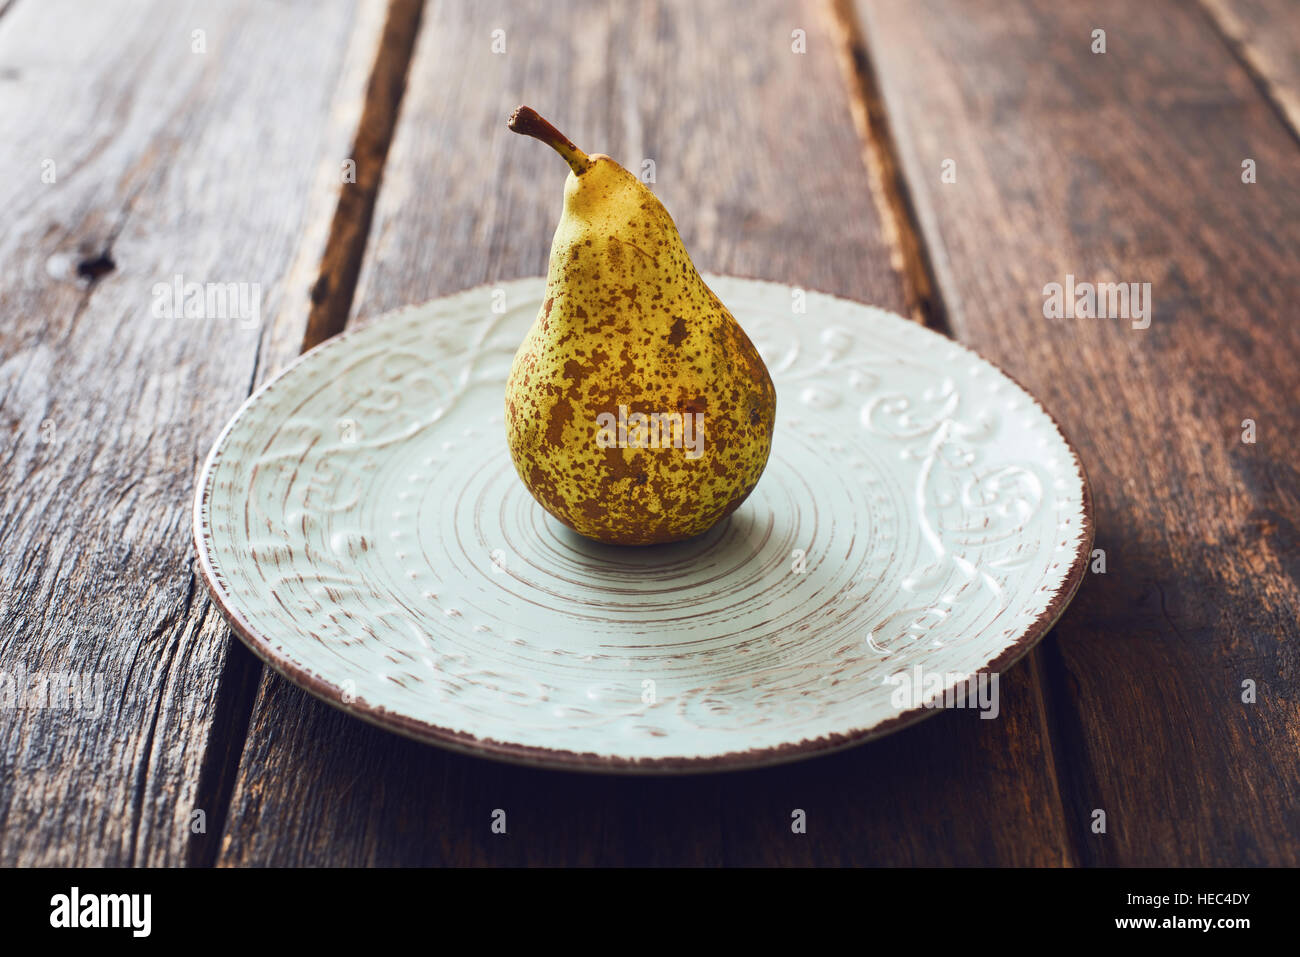 Pear on vintage dish and wooden table Stock Photo